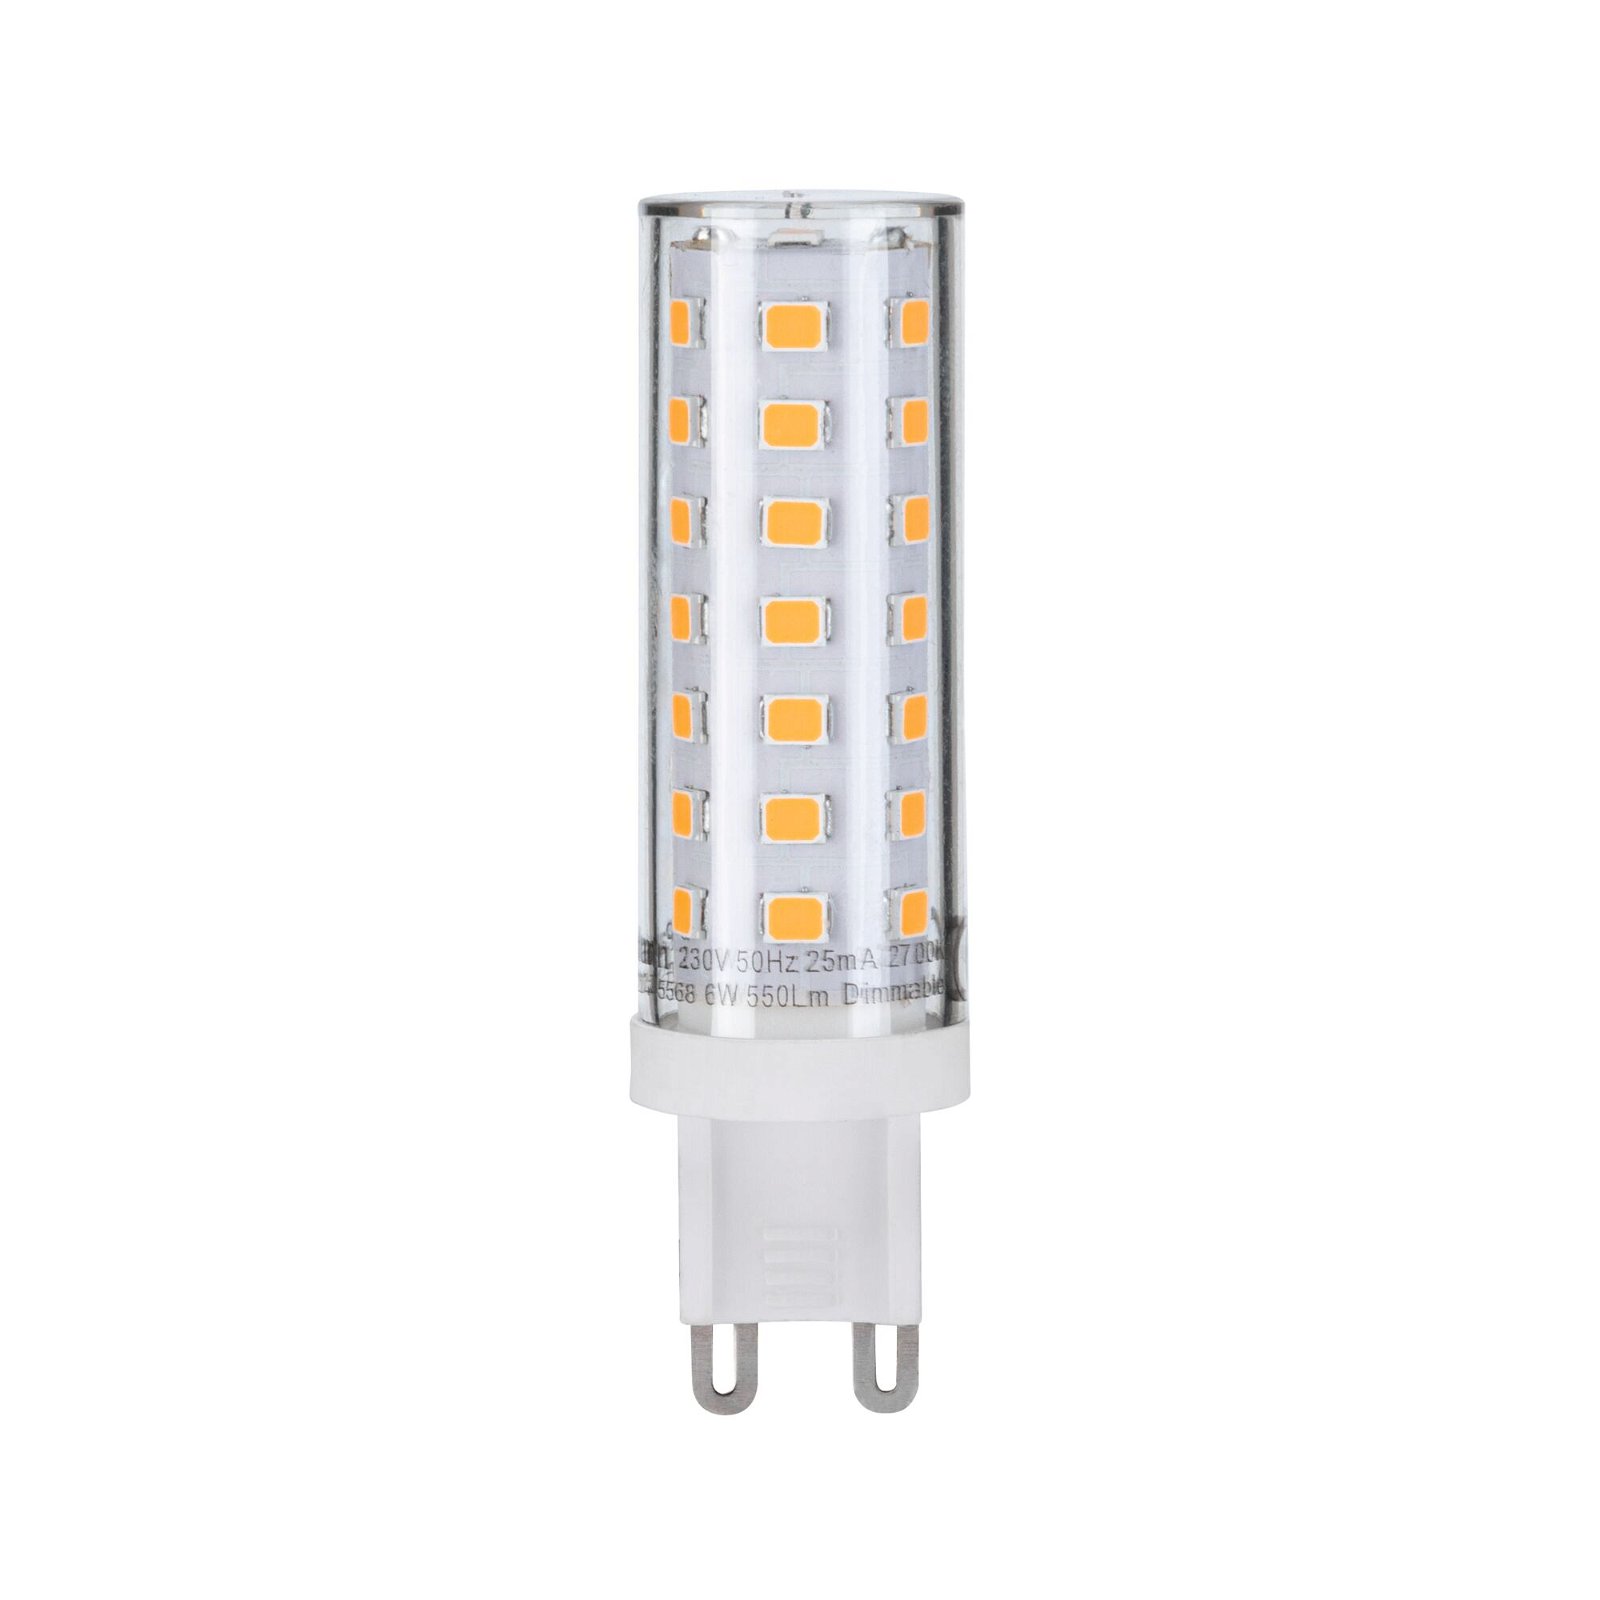 230 V Standard LED Pin base G9 1 pack 6W 2700K dimmable Clear